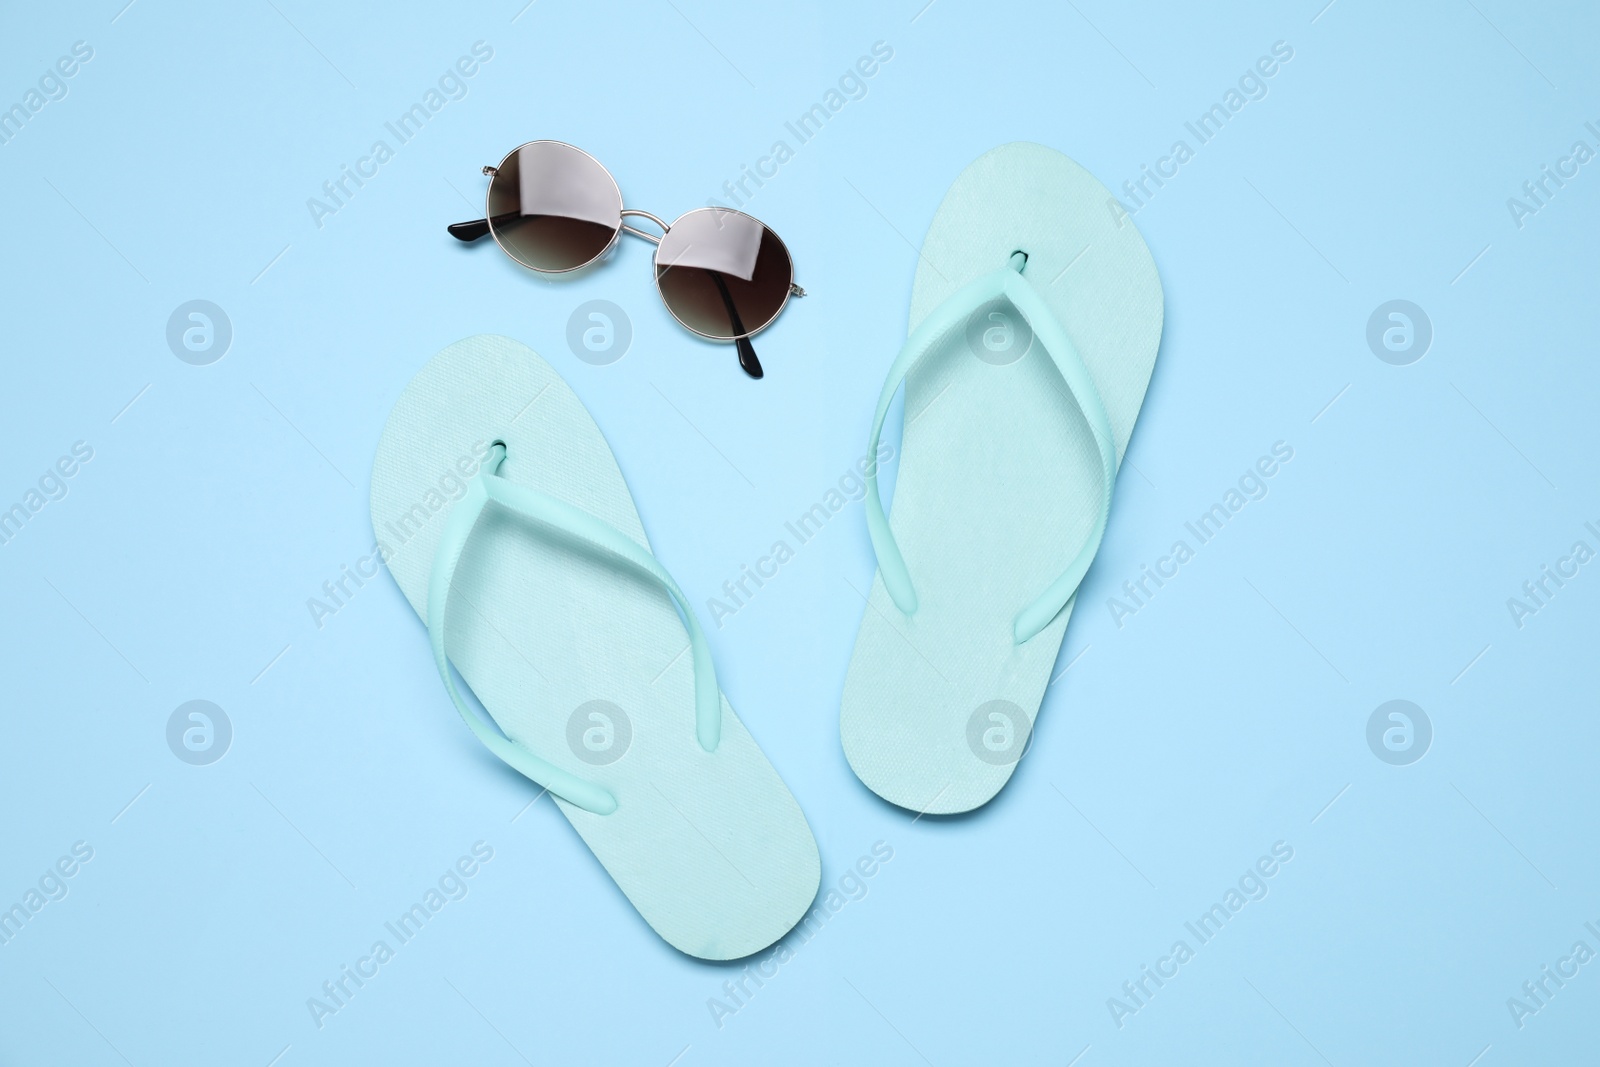 Photo of Flip flops and sunglasses on light blue background, flat lay. Beach objects